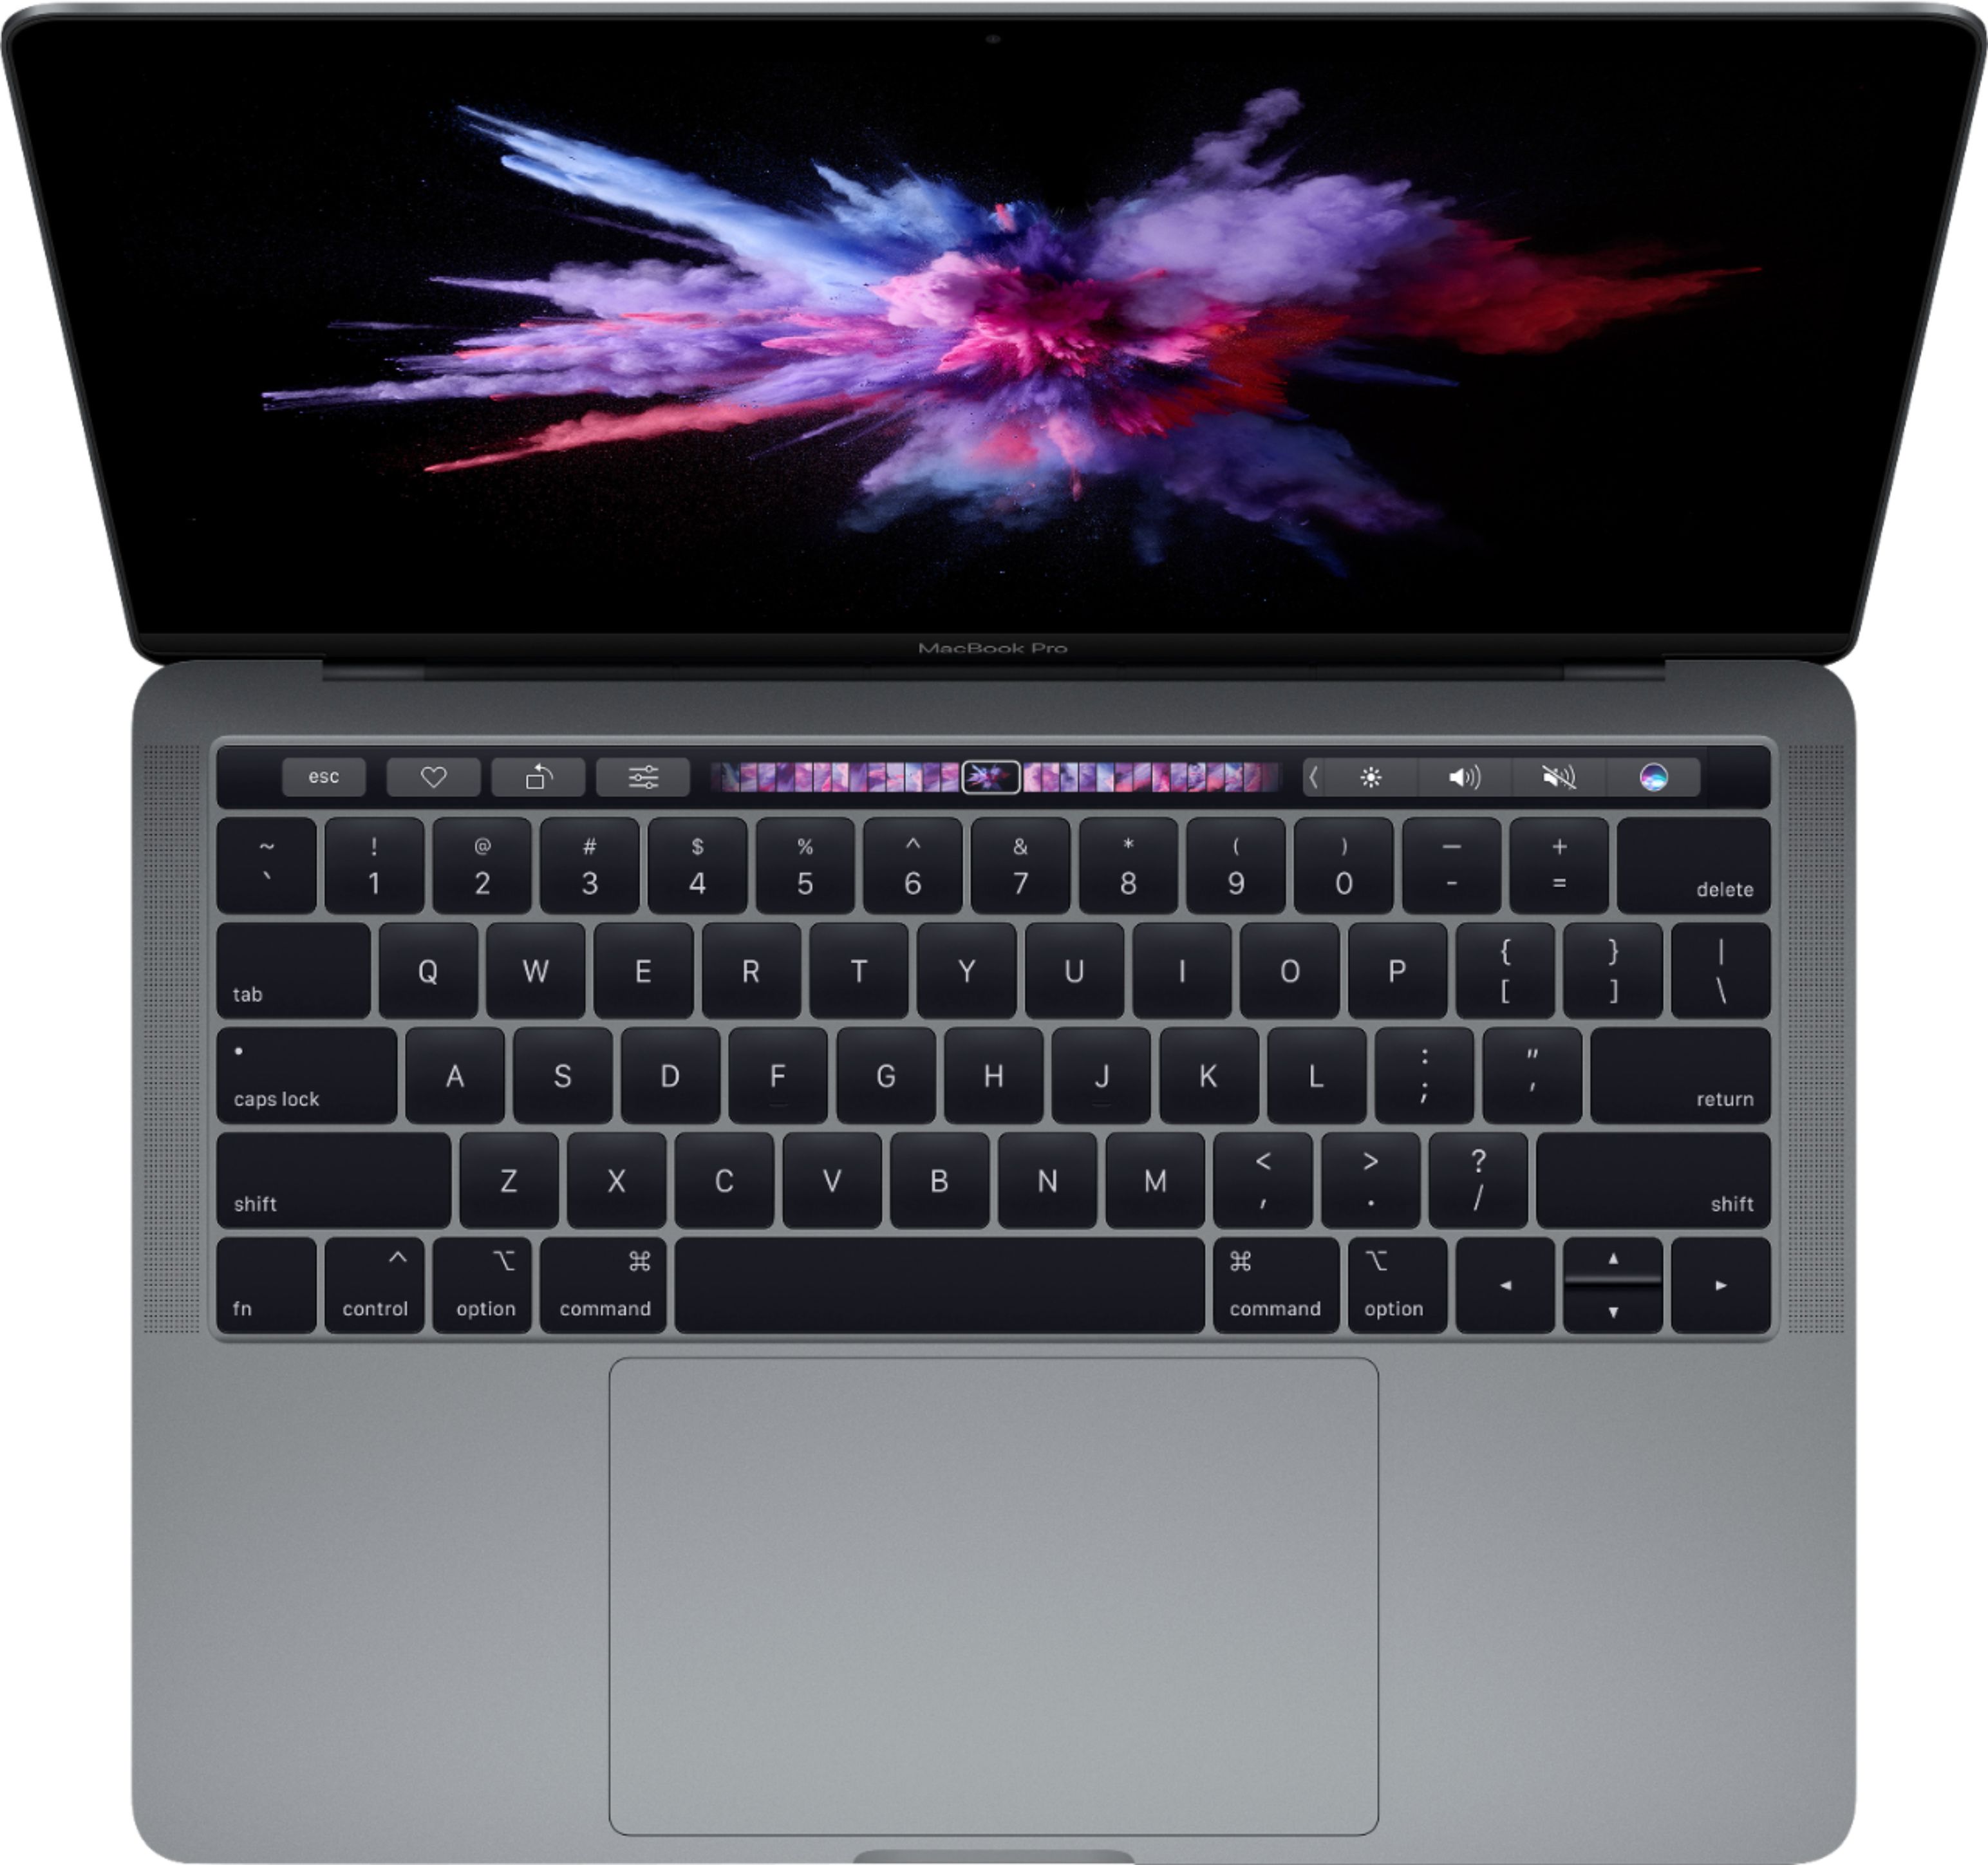 Apple Macbook Pro 13 Display With Touch Bar Intel Core I5 8gb Memory 128gb Ssd Space Gray Muhn2ll A Best Buy